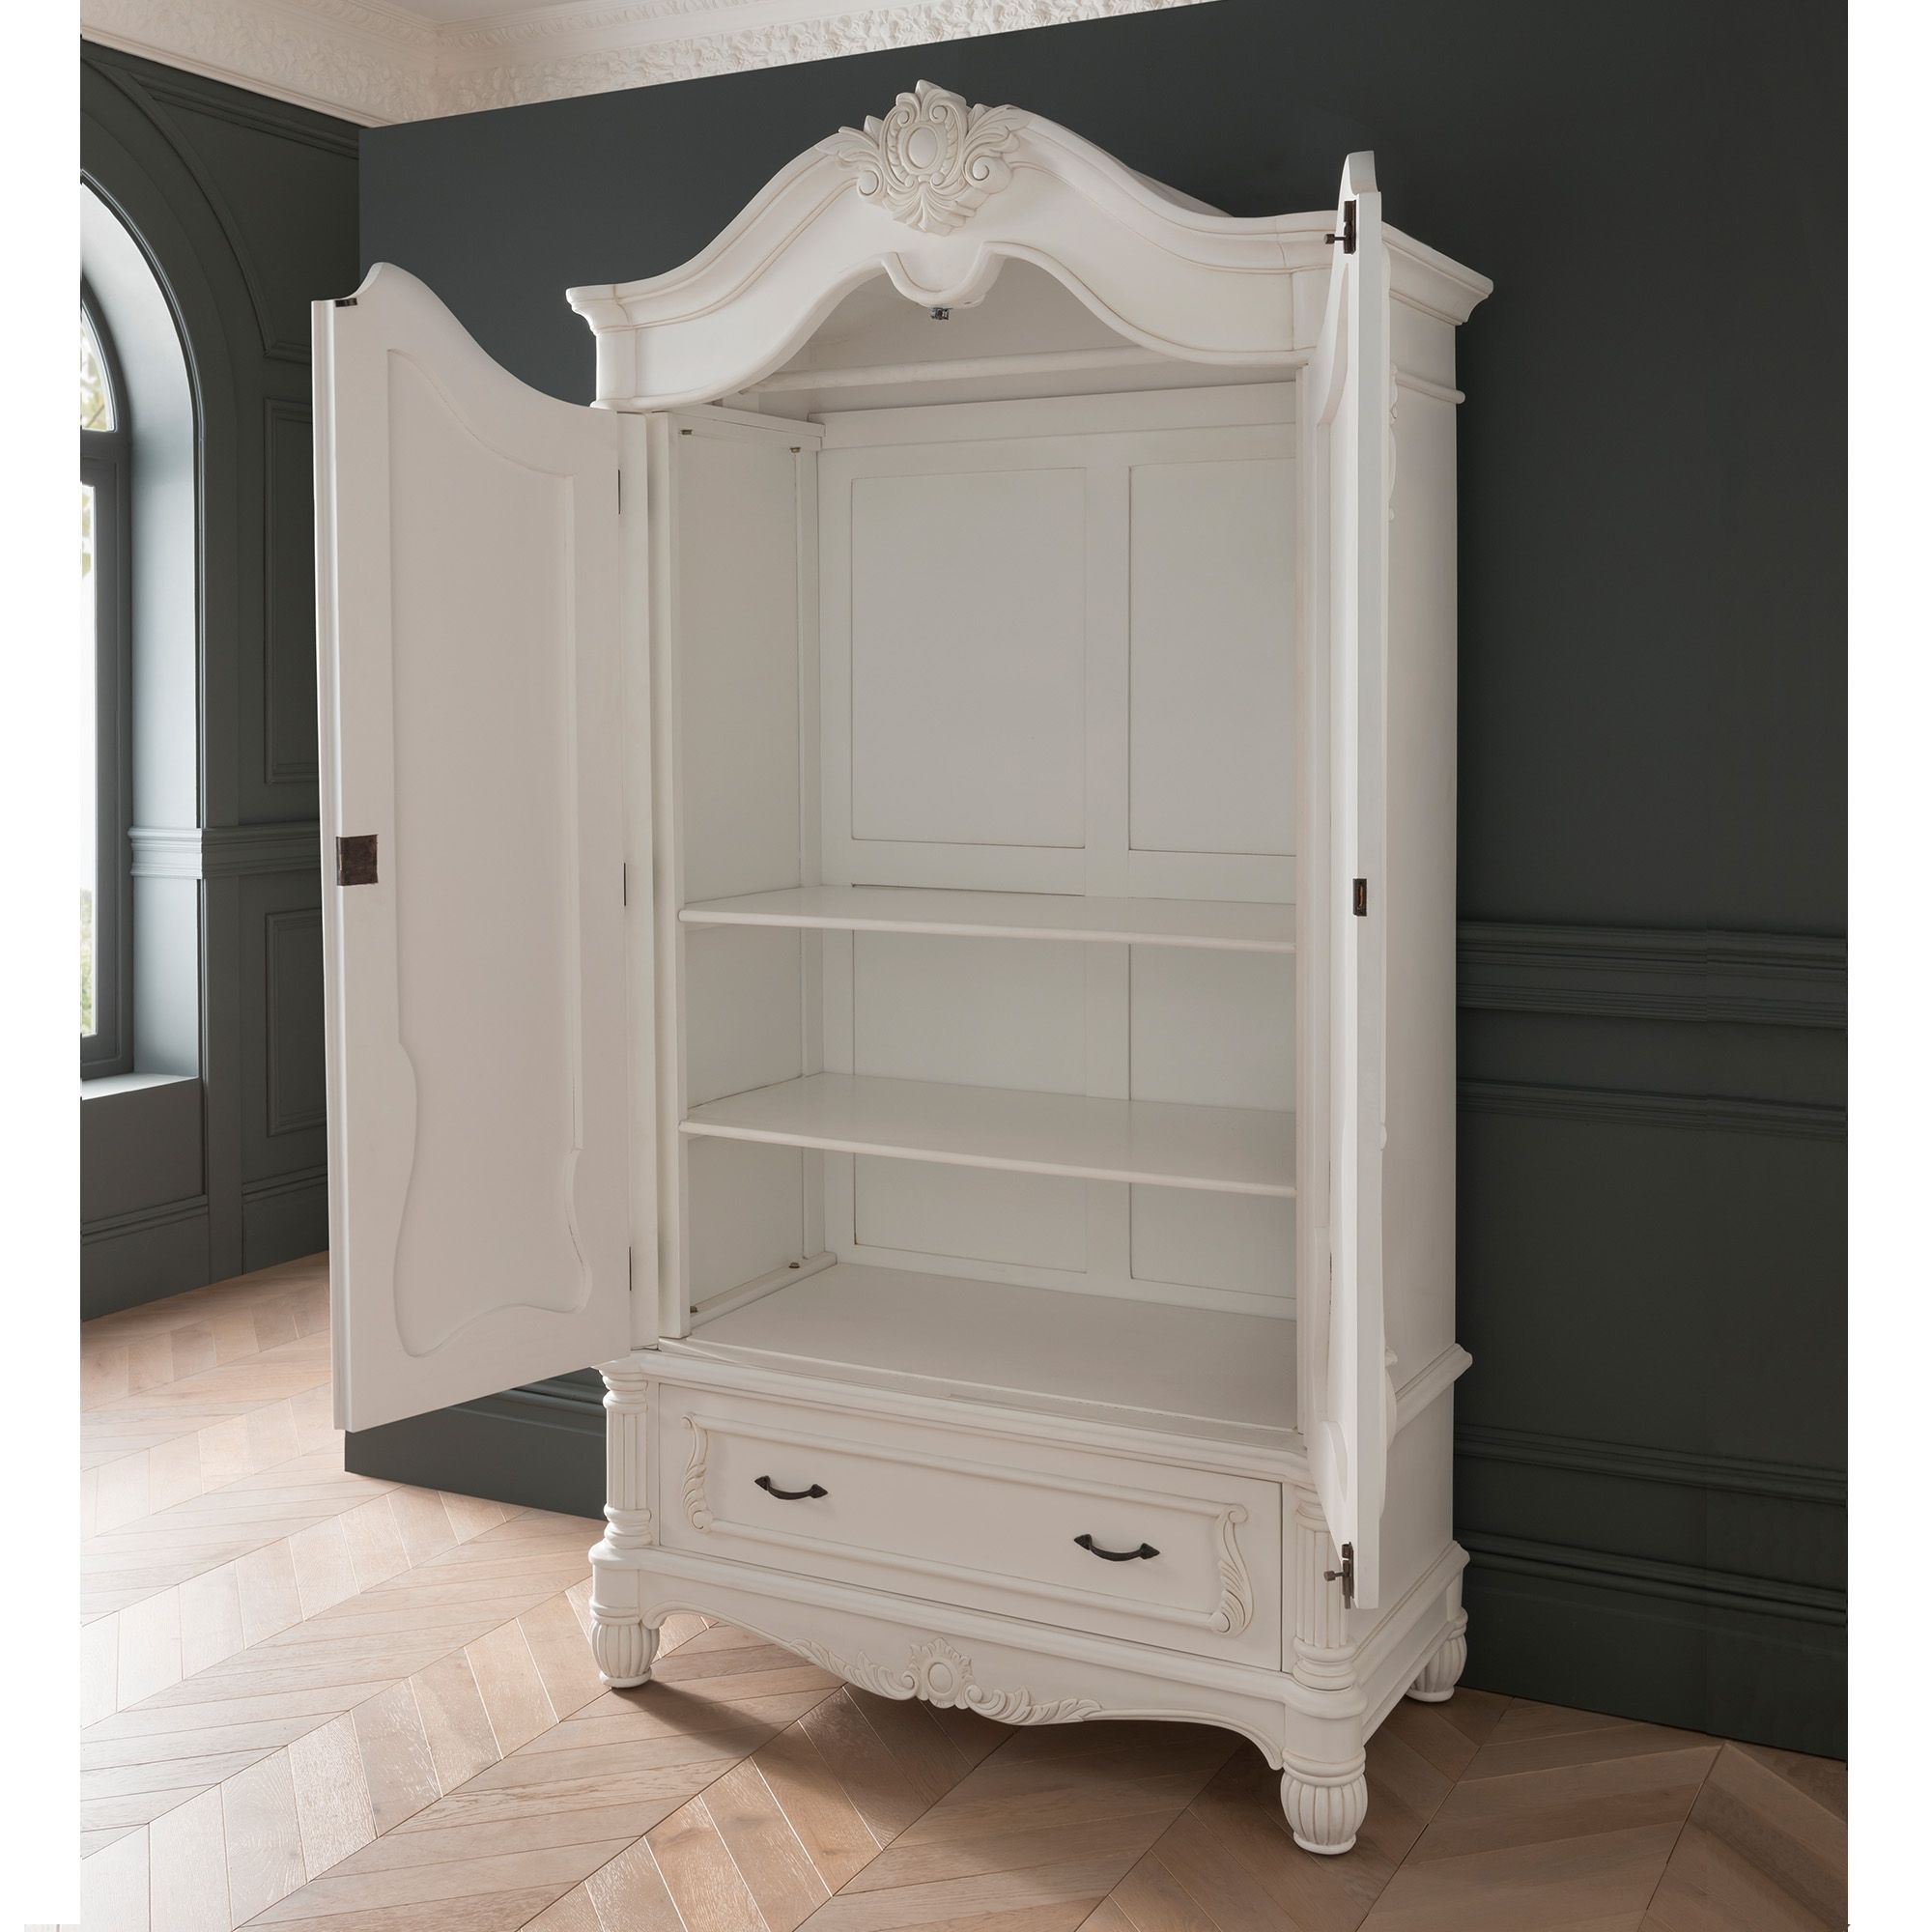 Antique French Style White Finished 1 Drawer Wardrobe | Homesdirect365 Intended For Single French Wardrobes (View 6 of 15)